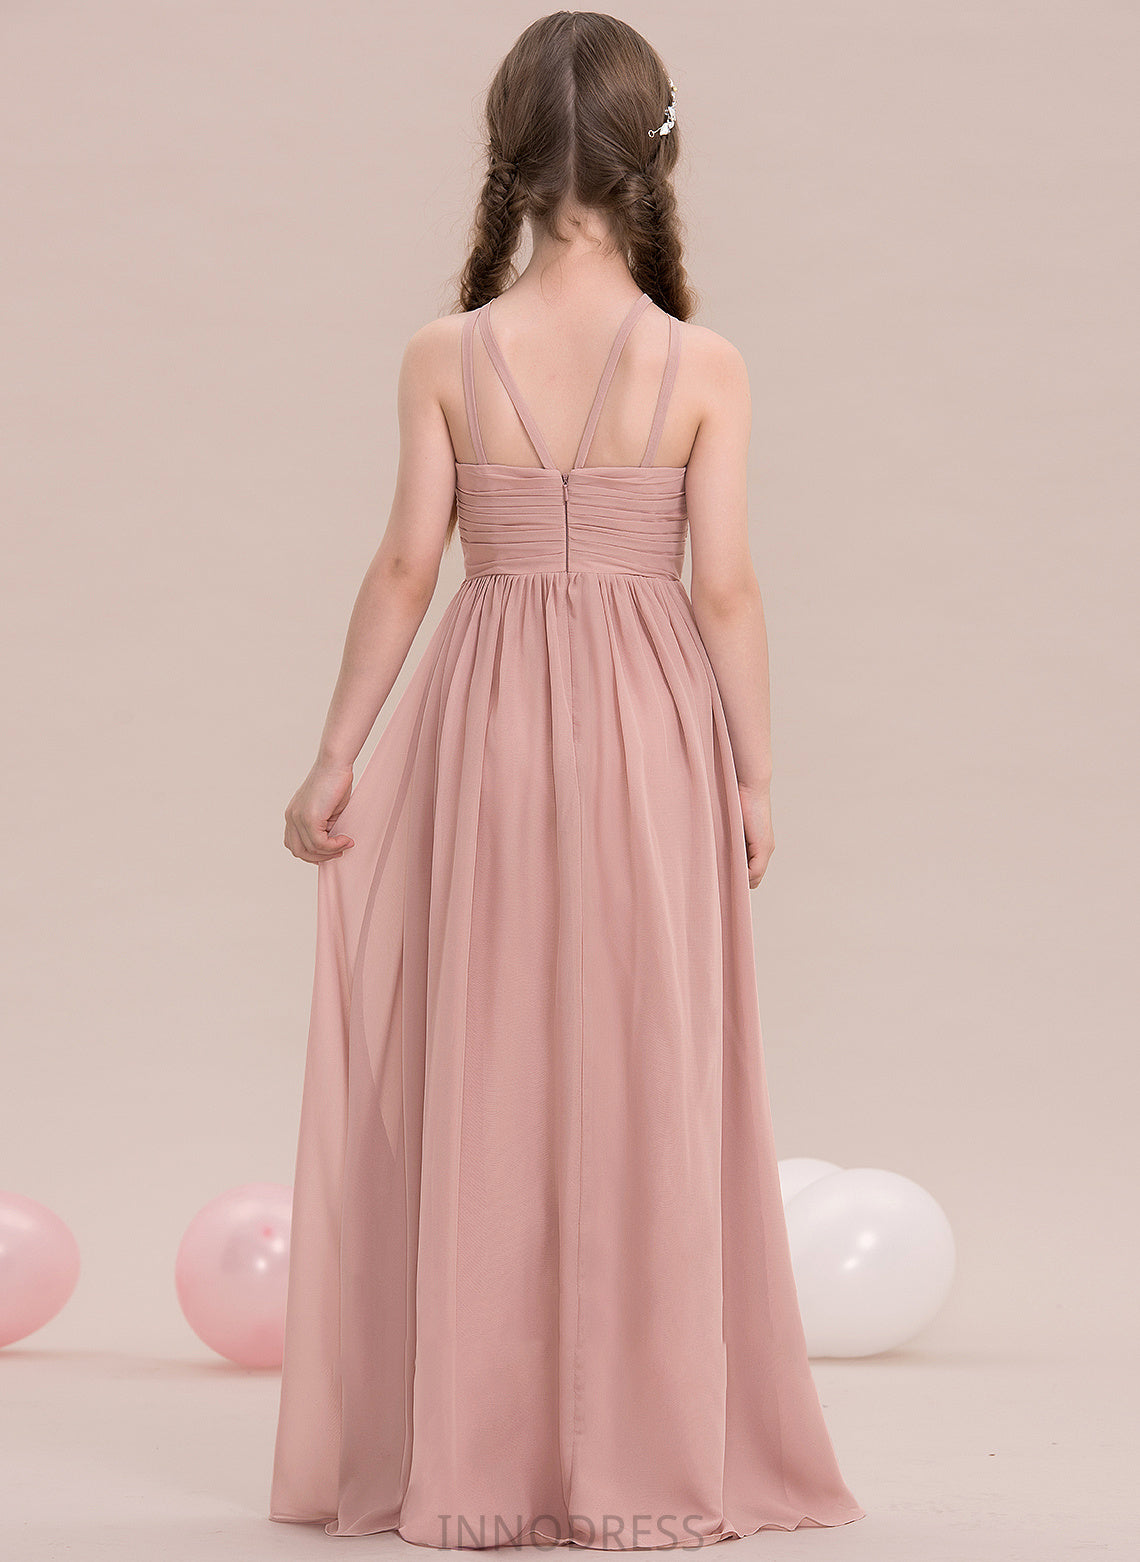 Chiffon With Ruffle Campbell Scoop Floor-Length A-Line Junior Bridesmaid Dresses Neck